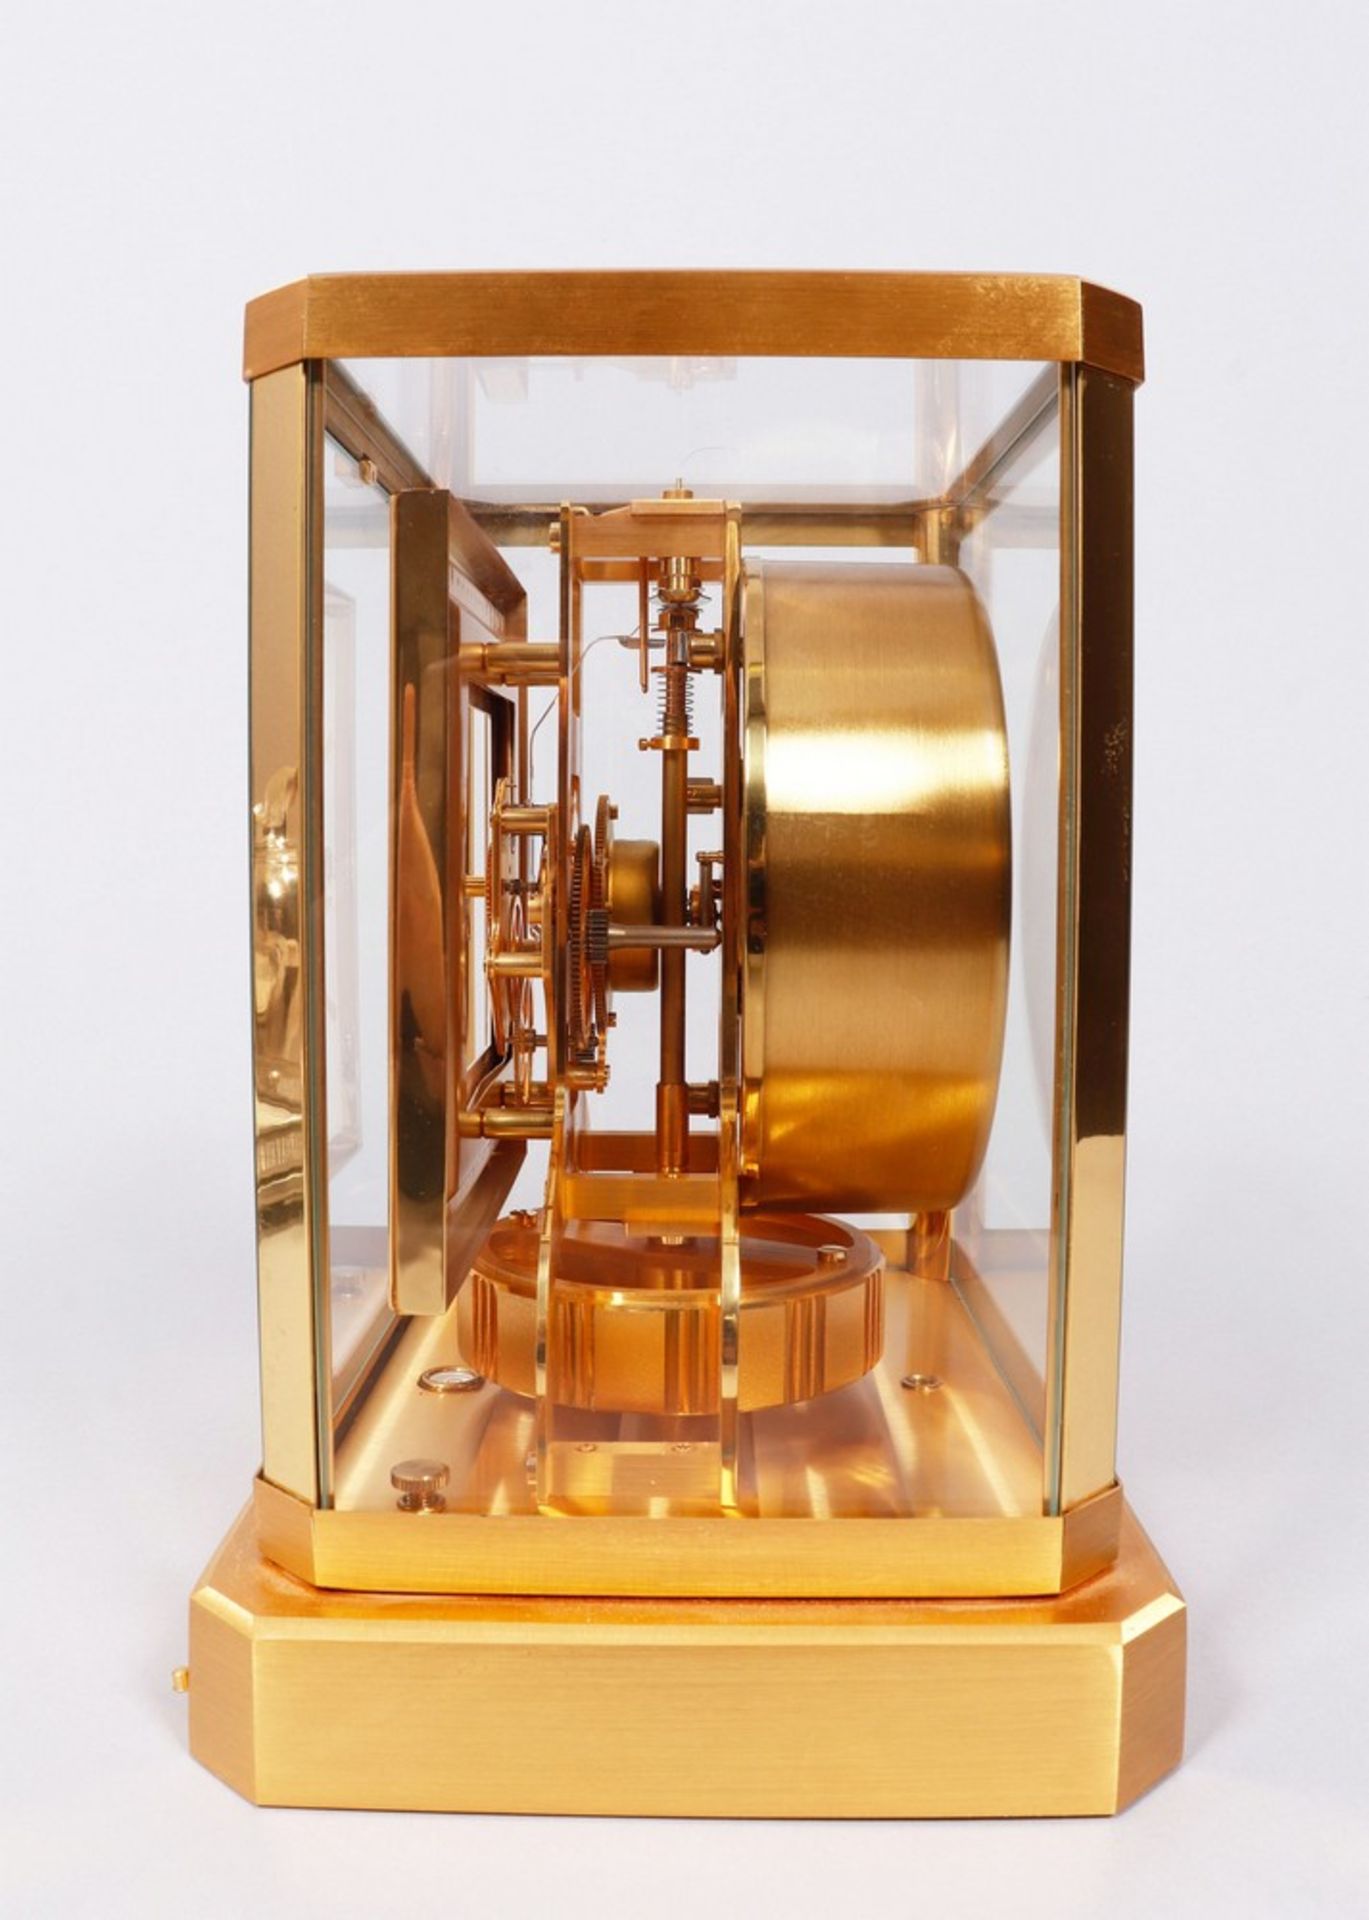 Table clock, Jaeger-LeCoultre, Switzerland, 1970s - Image 9 of 10